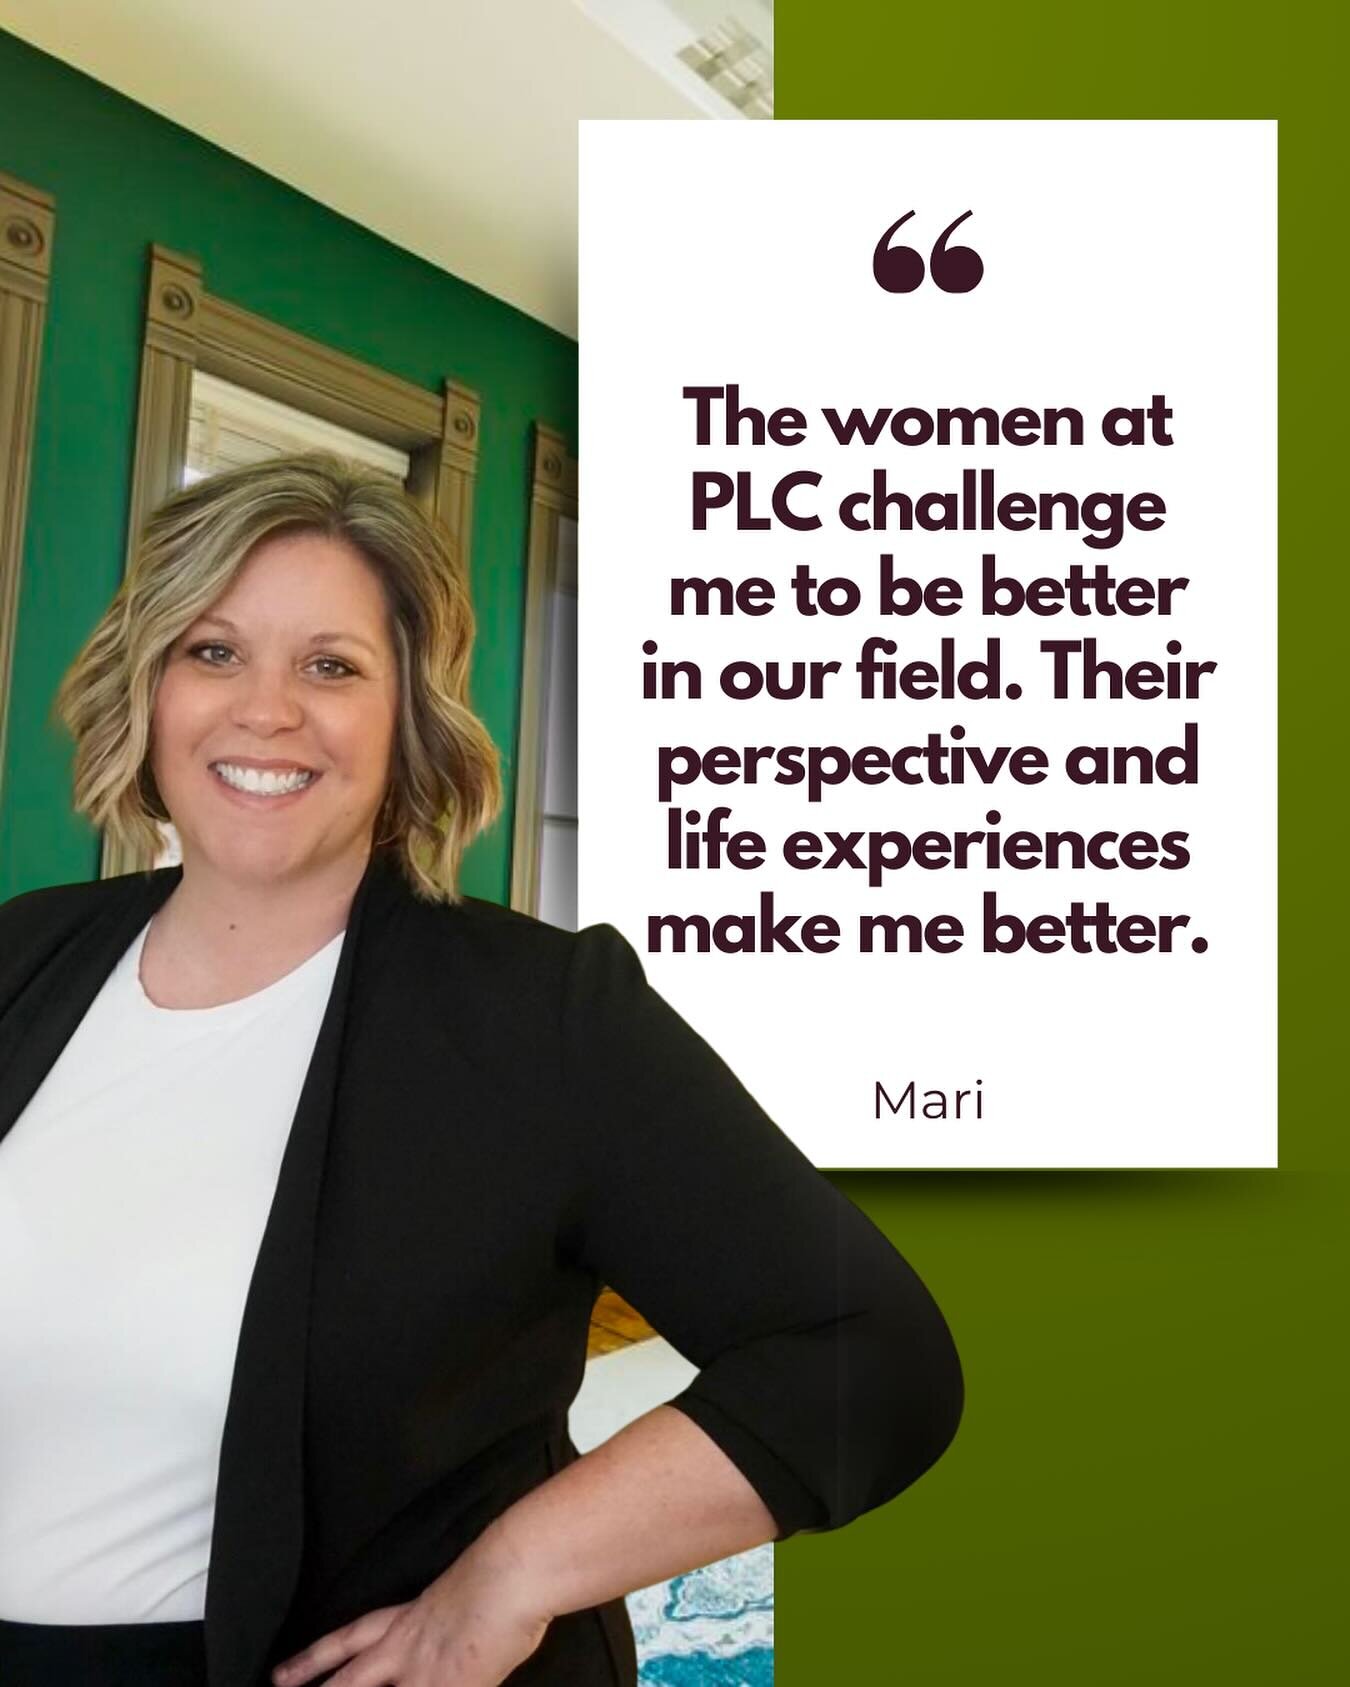 In the spirit of Women&rsquo;s History Month, we&rsquo;re spotlighting the profound ways women shape our lives. This week&rsquo;s response comes from Mari, one of our team members at Paula Lain Counseling! 

&ldquo;I have been impacted by so many wom